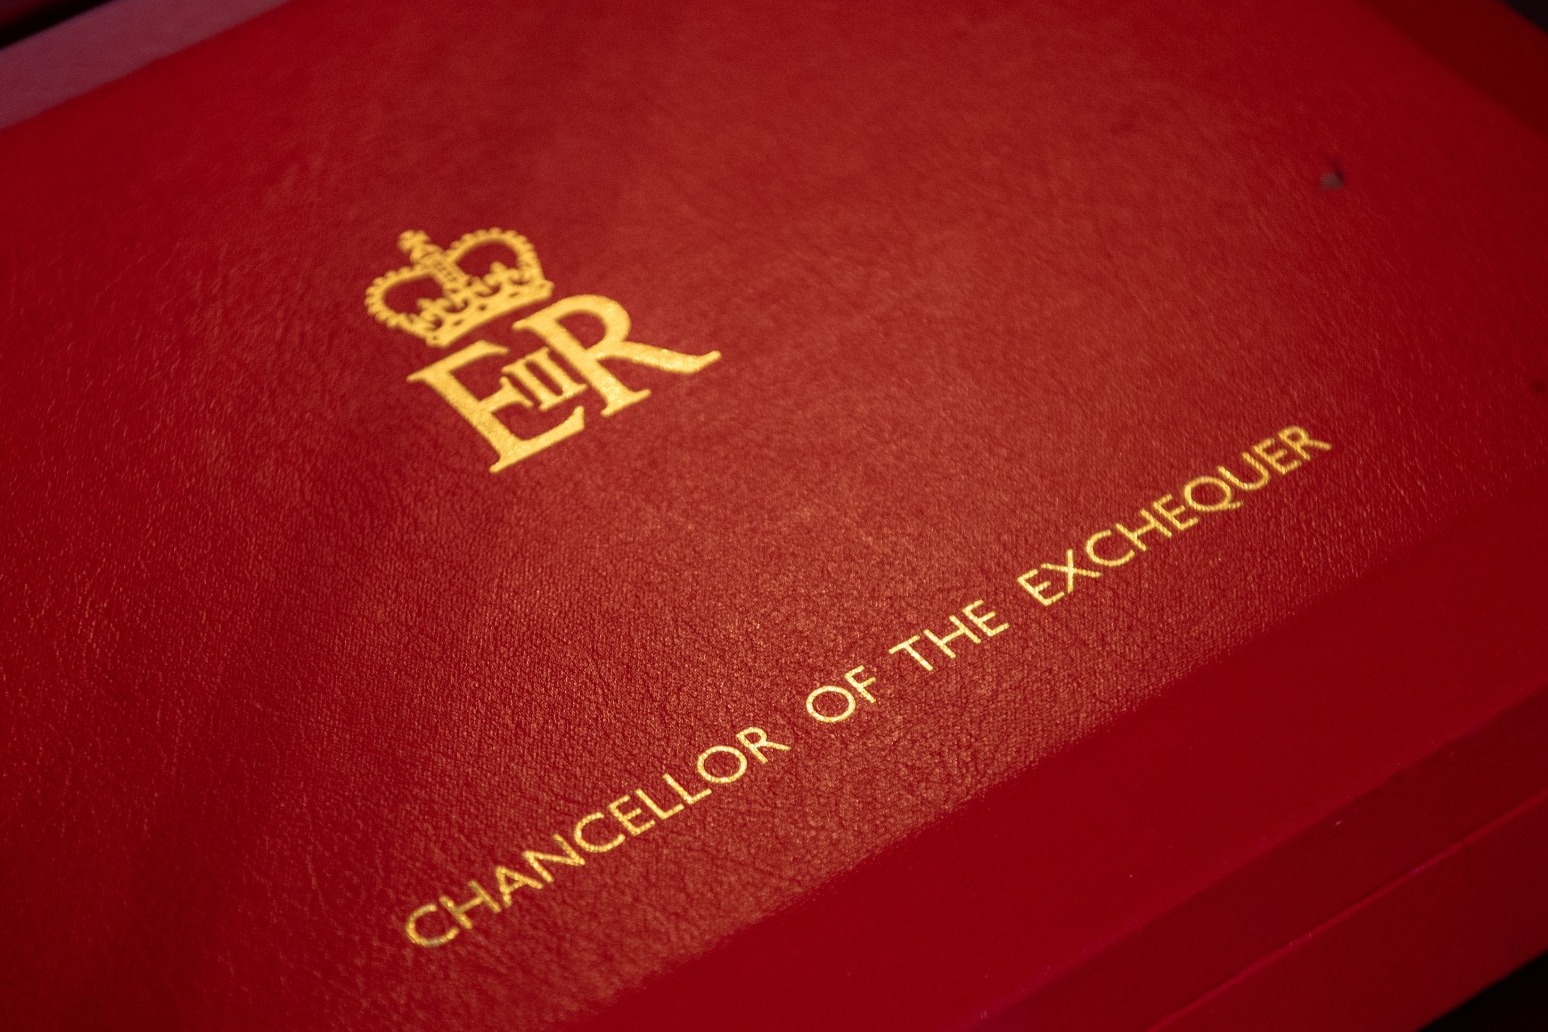 Budget to go ahead next month - Chancellor confirms 